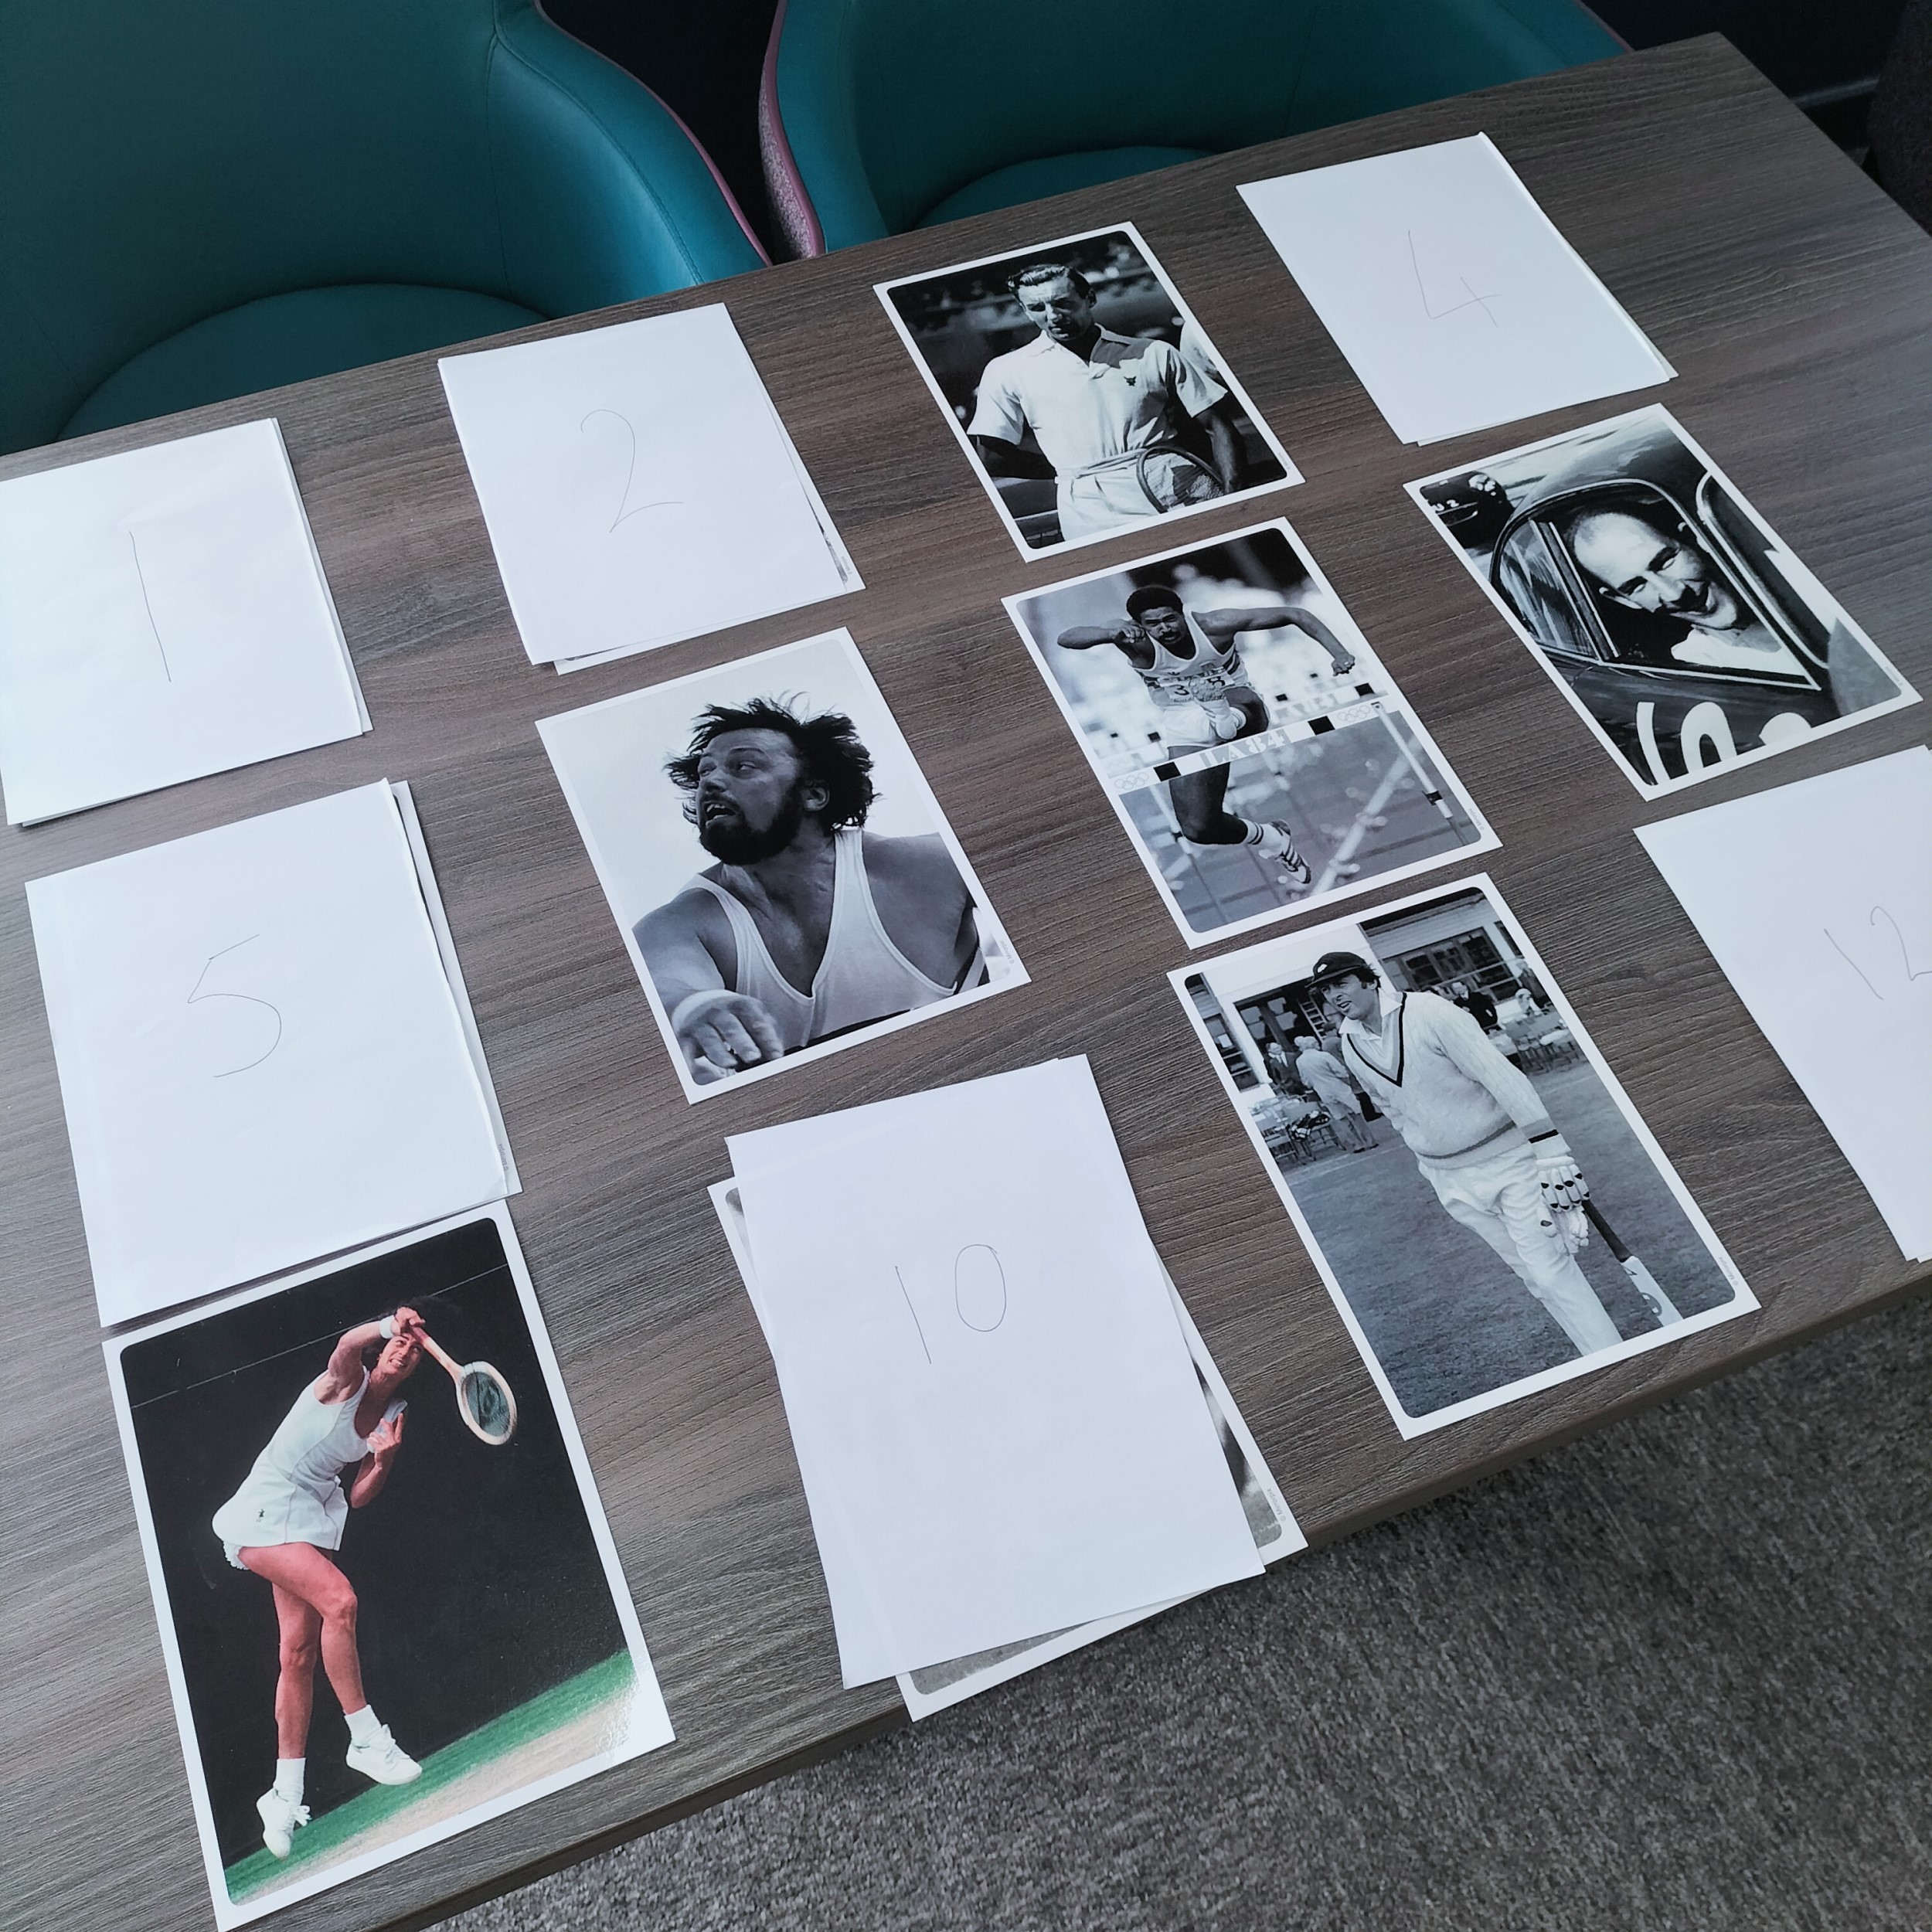 Twelve pictures on on a table in a grid formation, some are blank and some show sports stars.